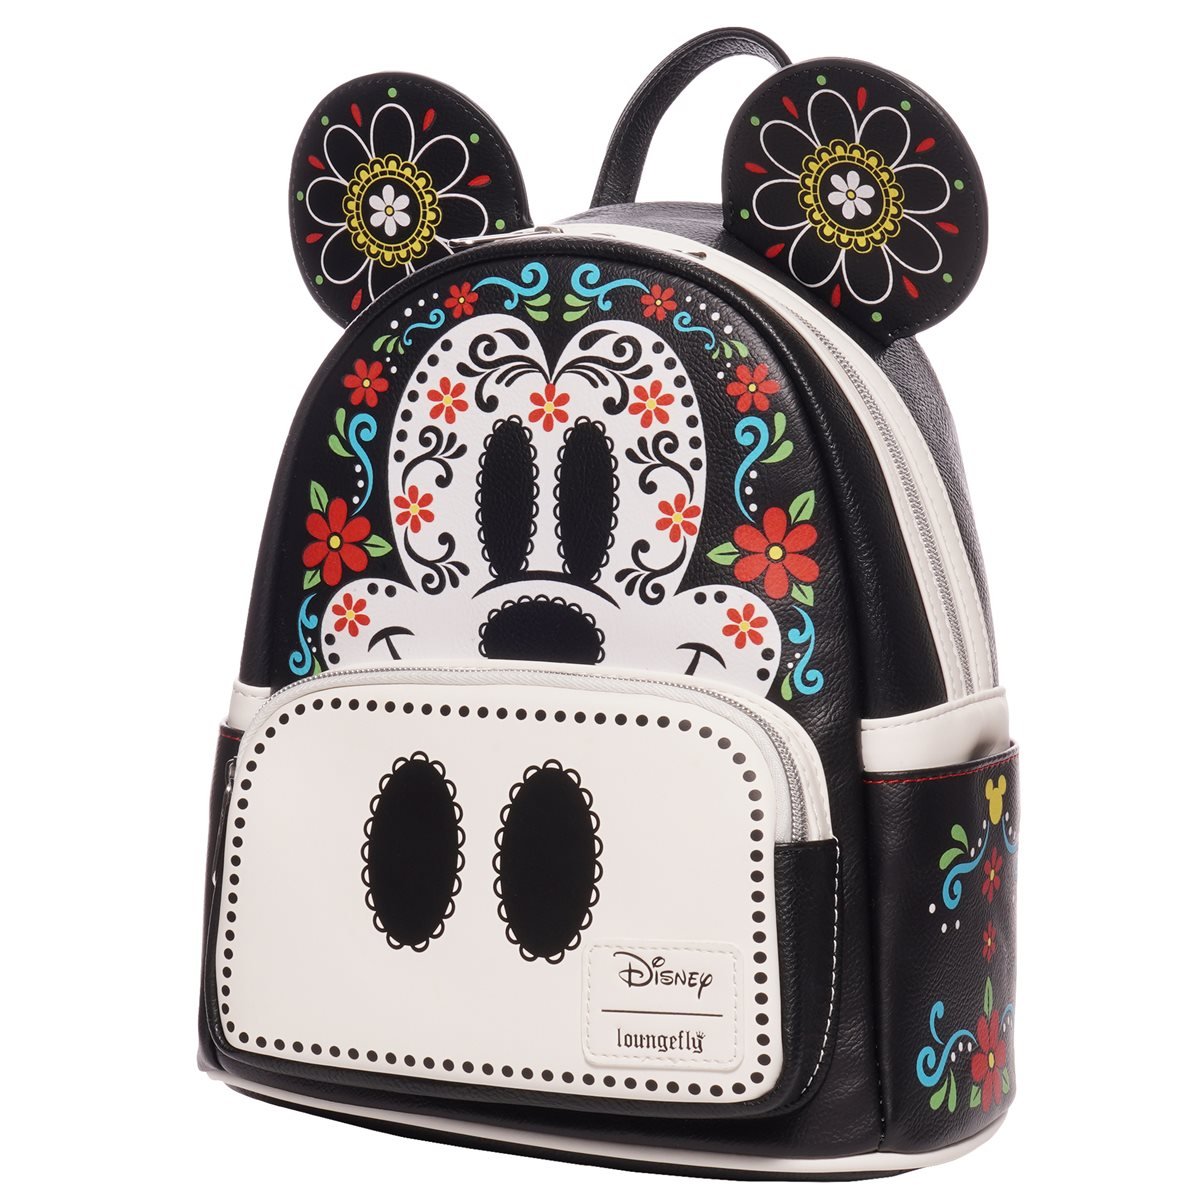 671803441897 - Loungefly Disney Mickey Mouse Dia de los Muertos Sugar Skull Mini Backpack - Entertainment Earth Ex - Side View